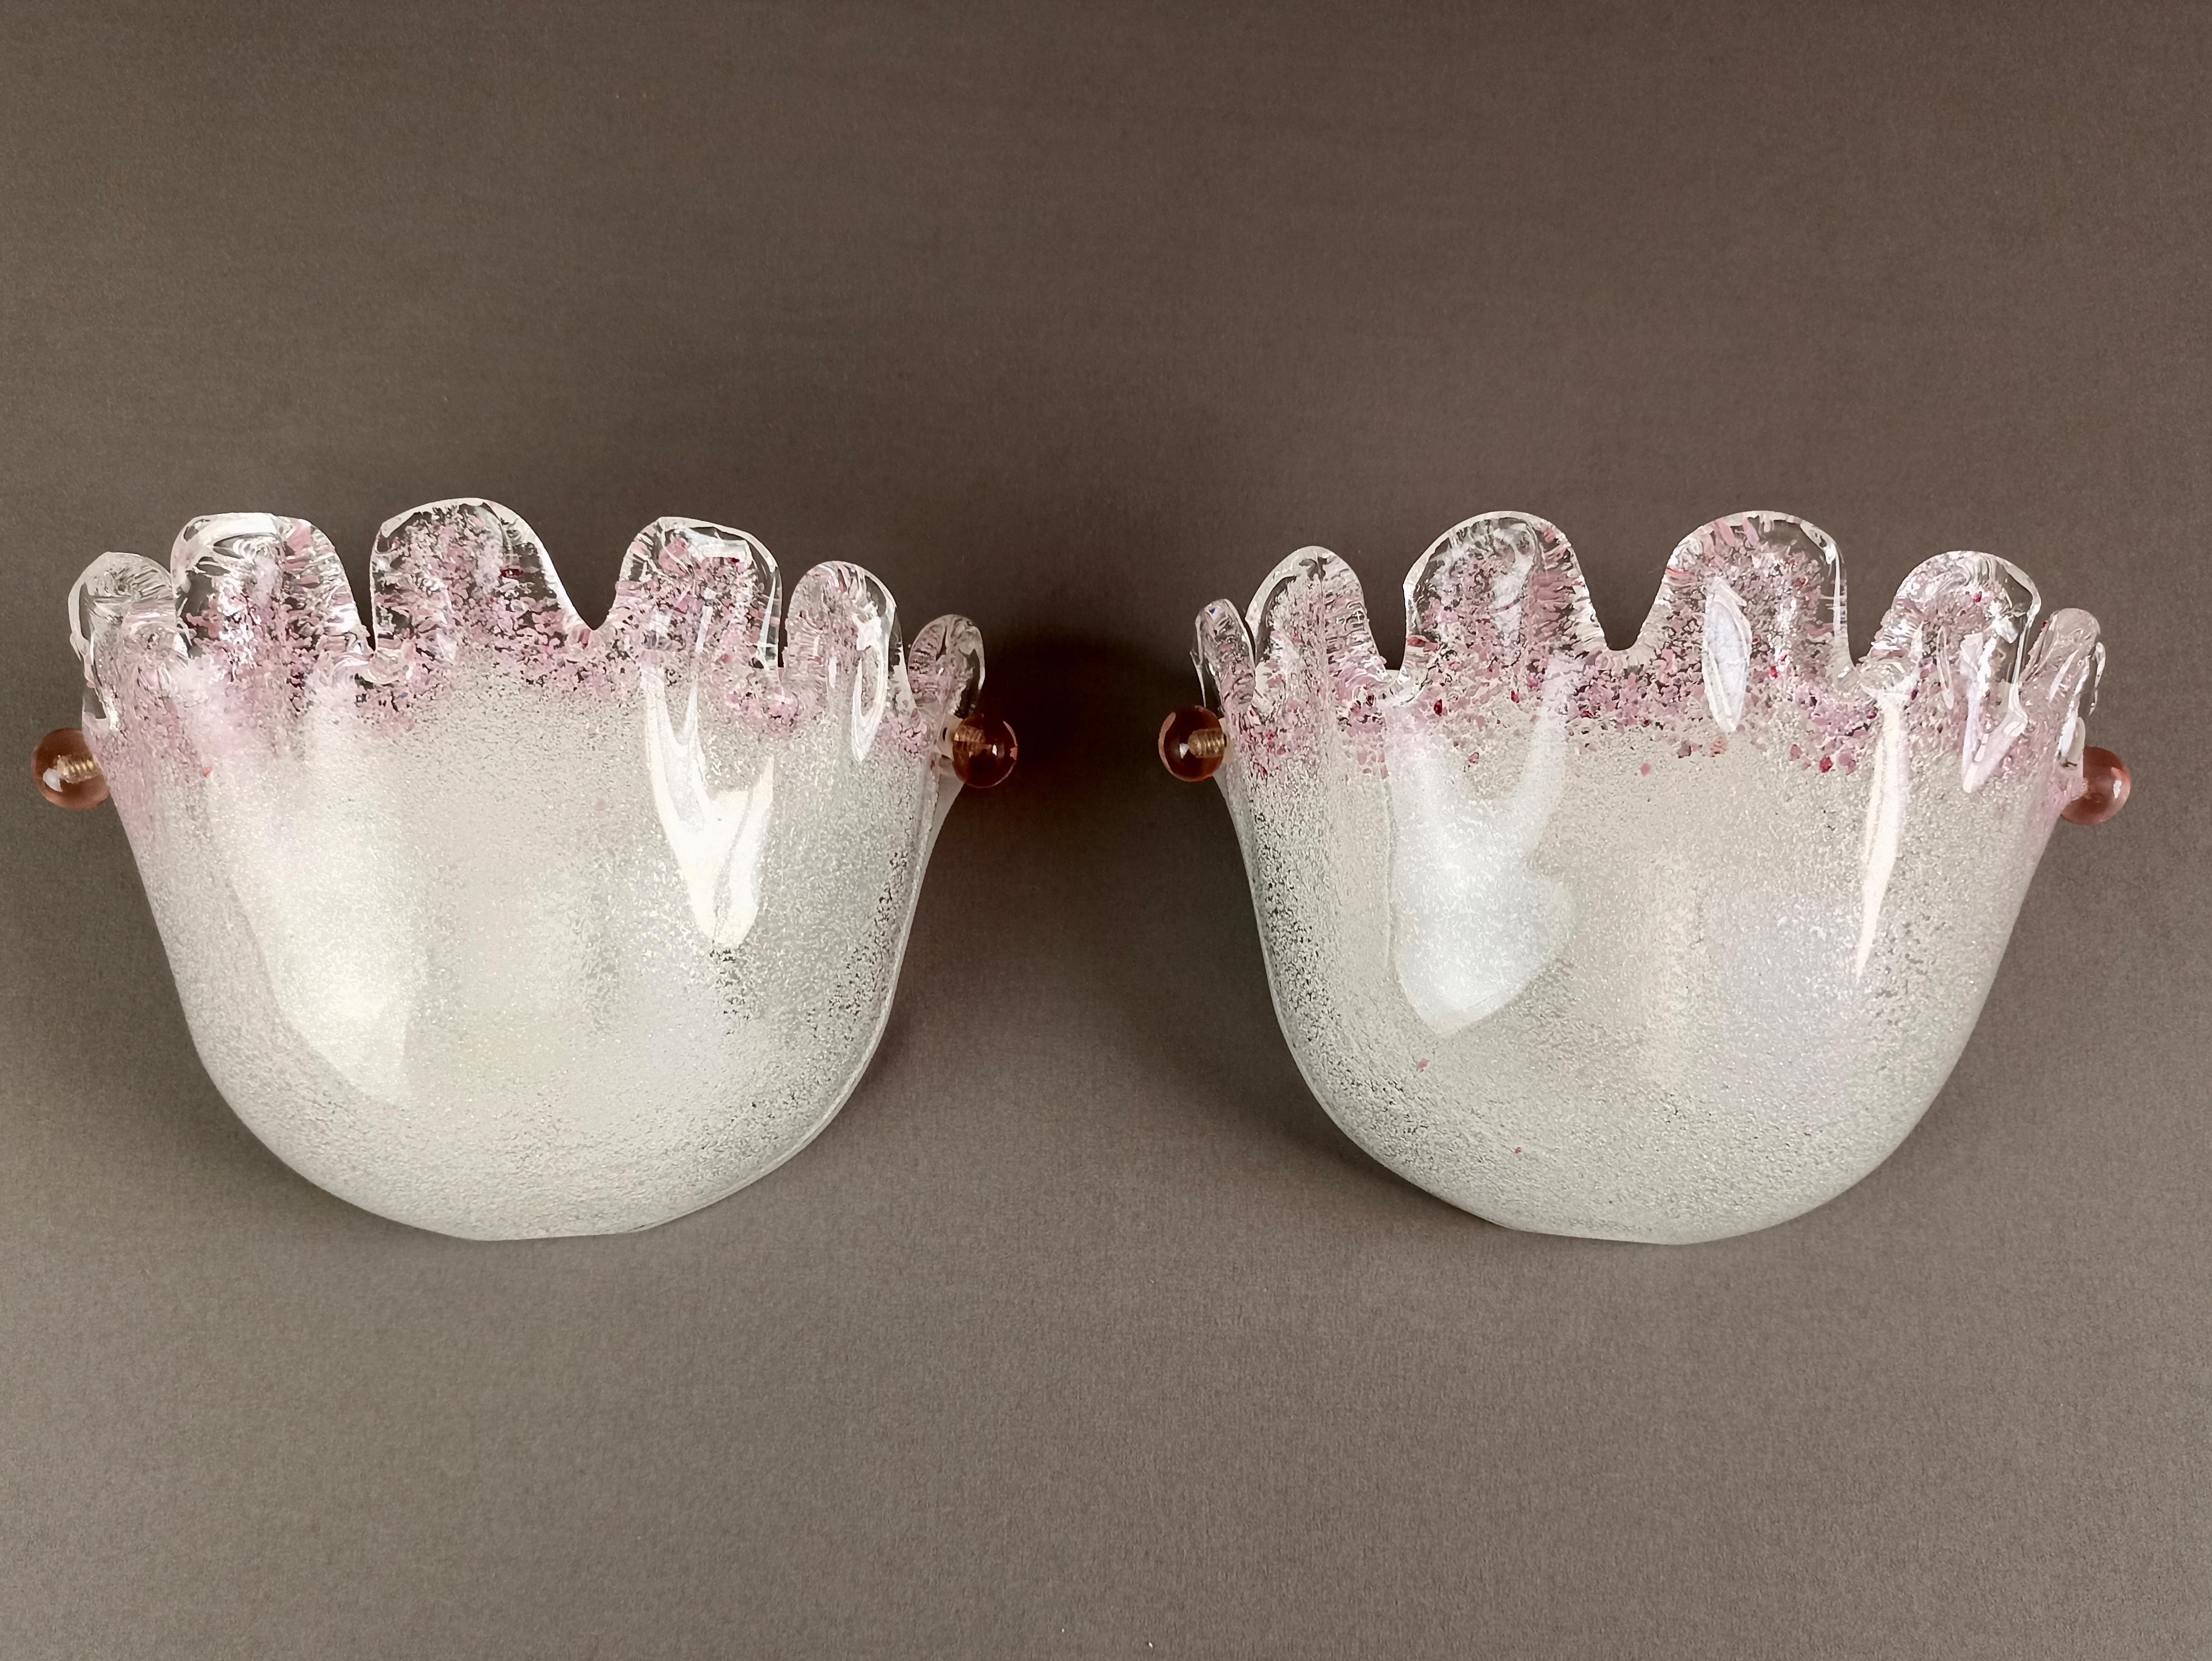 Modern Murano art glass set of two 1980s wall lamps in white and peachy pink graniglia